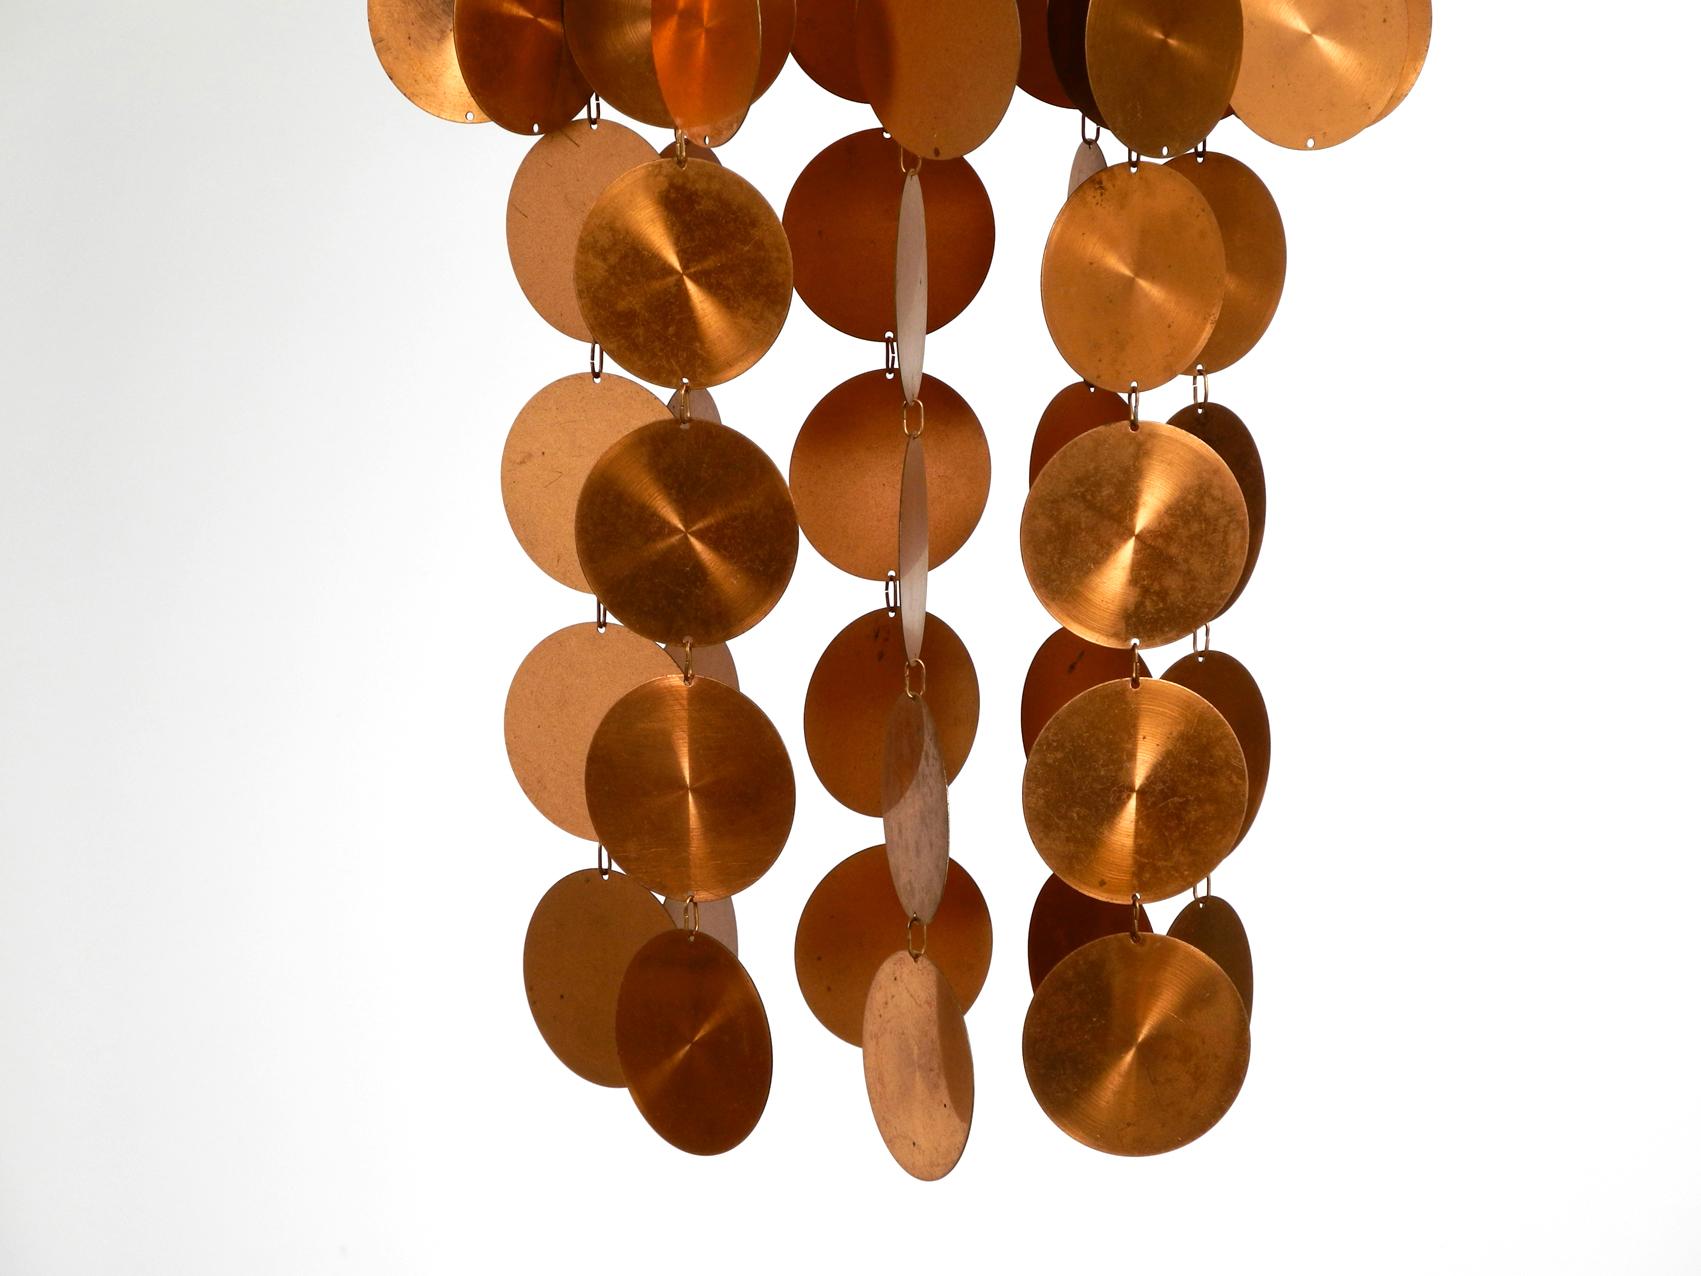 Stunning 1970s Pop Art Extra Large Lamp with Copper Discs Arranged as a Grape For Sale 1